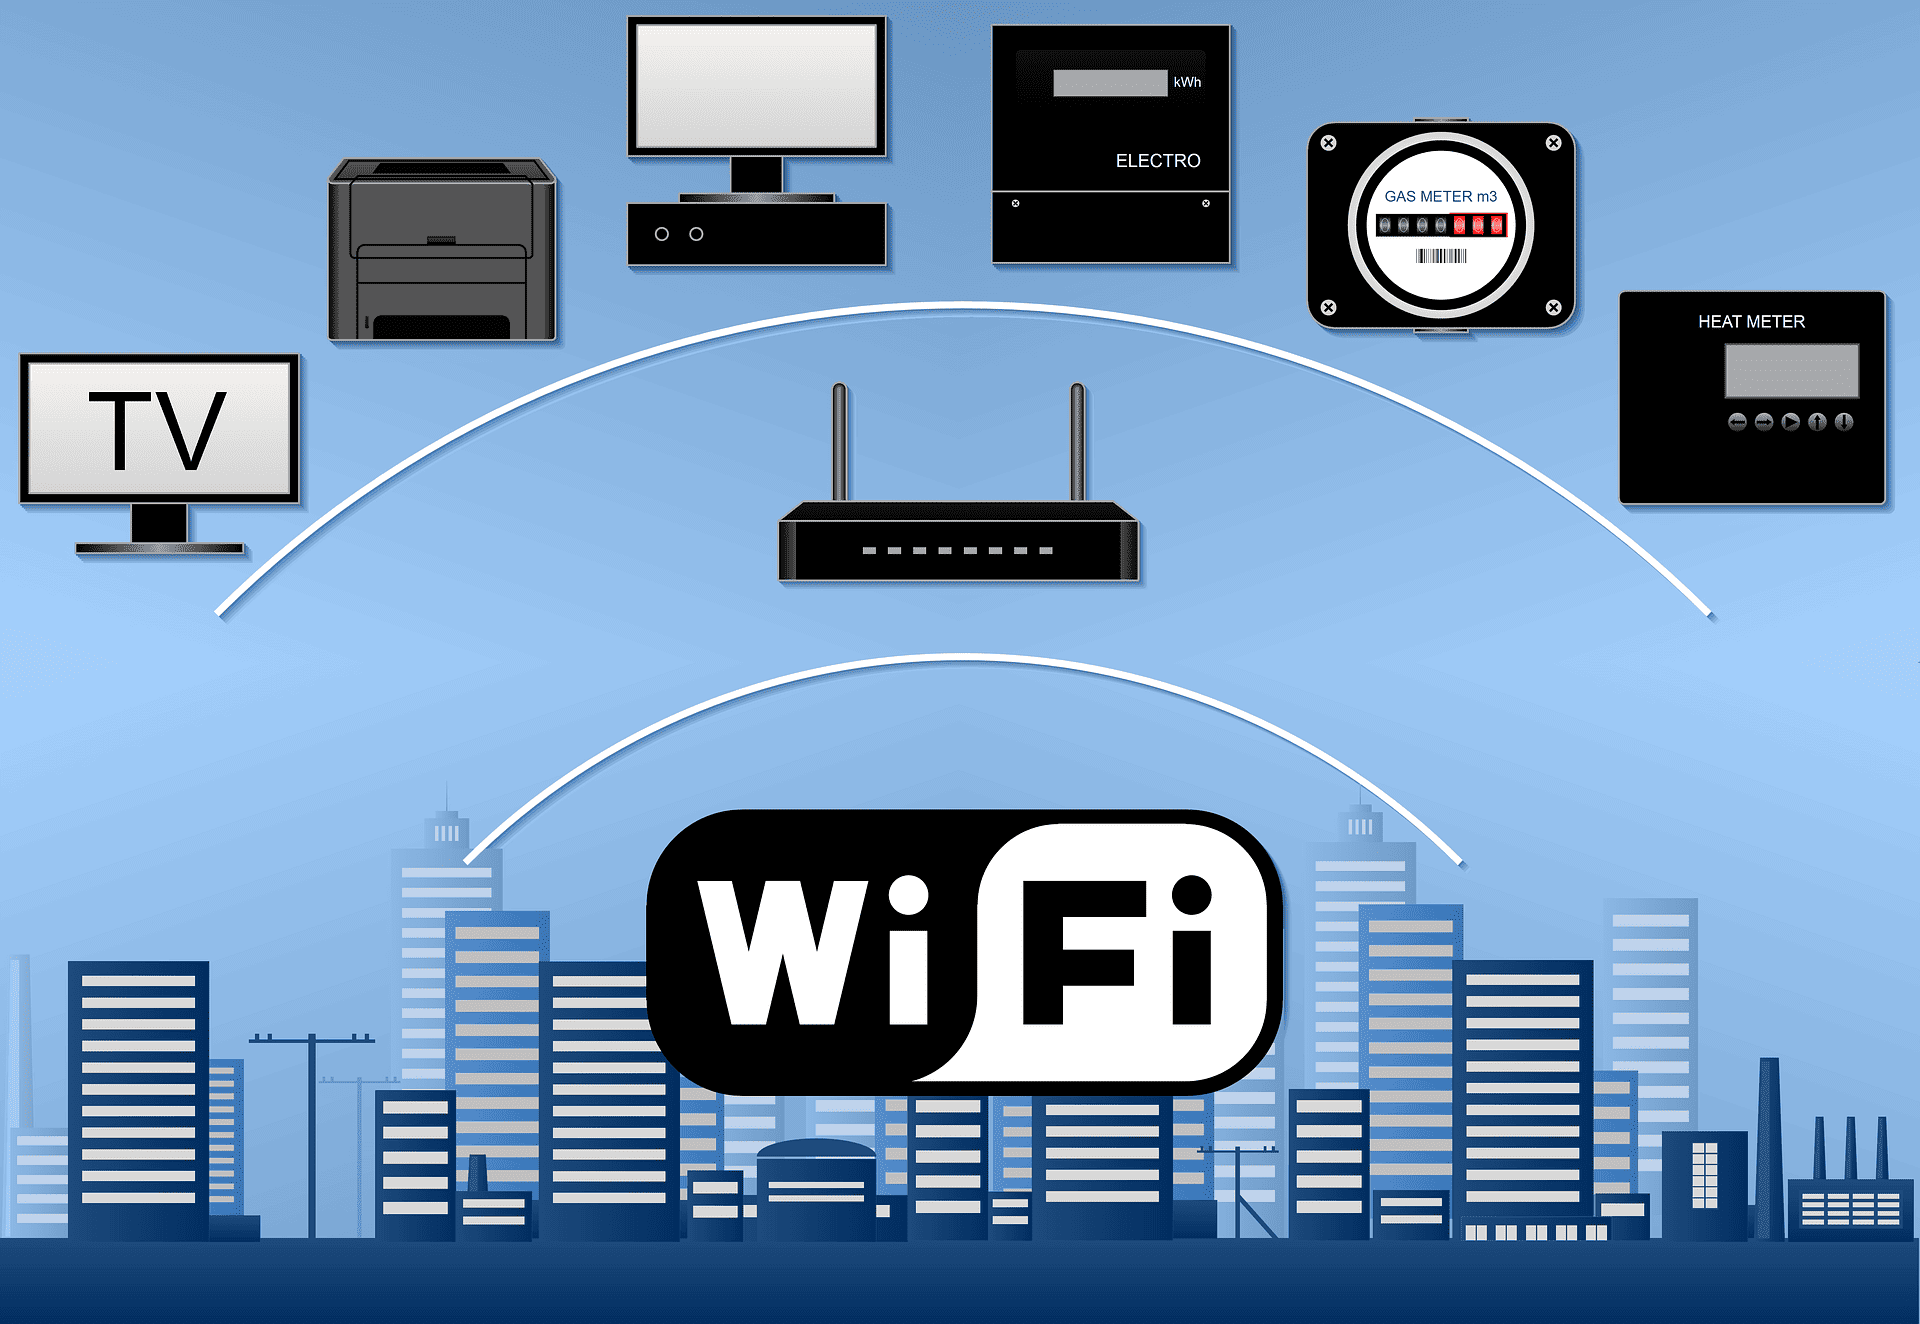 graphic showing Wi-Fi hardware